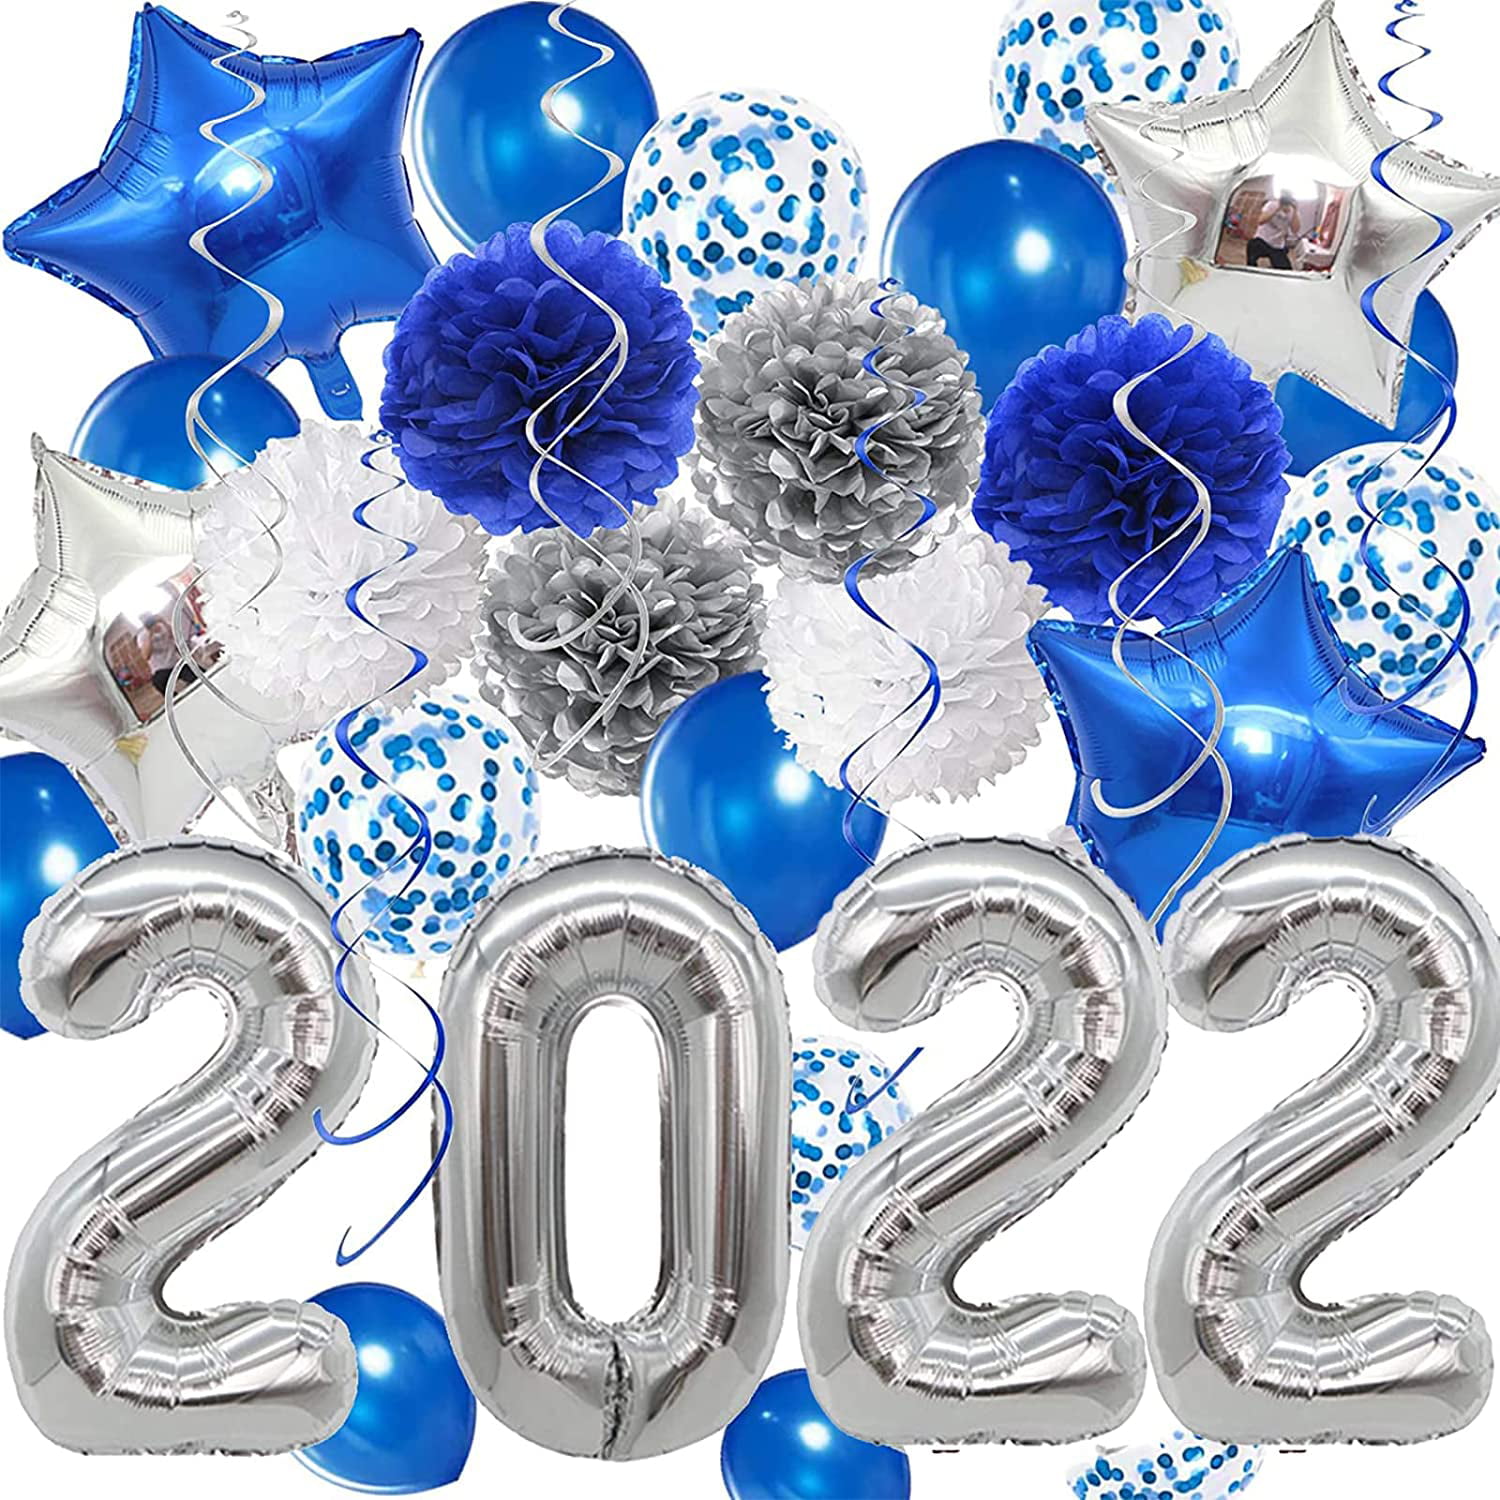 Big New Years Eve Party Supplies 2022 Graduation Party Decorations 2022 22 Inch Silver and Black Foil Balloons Metallic Silver and Black Balloons Black and Silver Party Decorations Pack of 6 